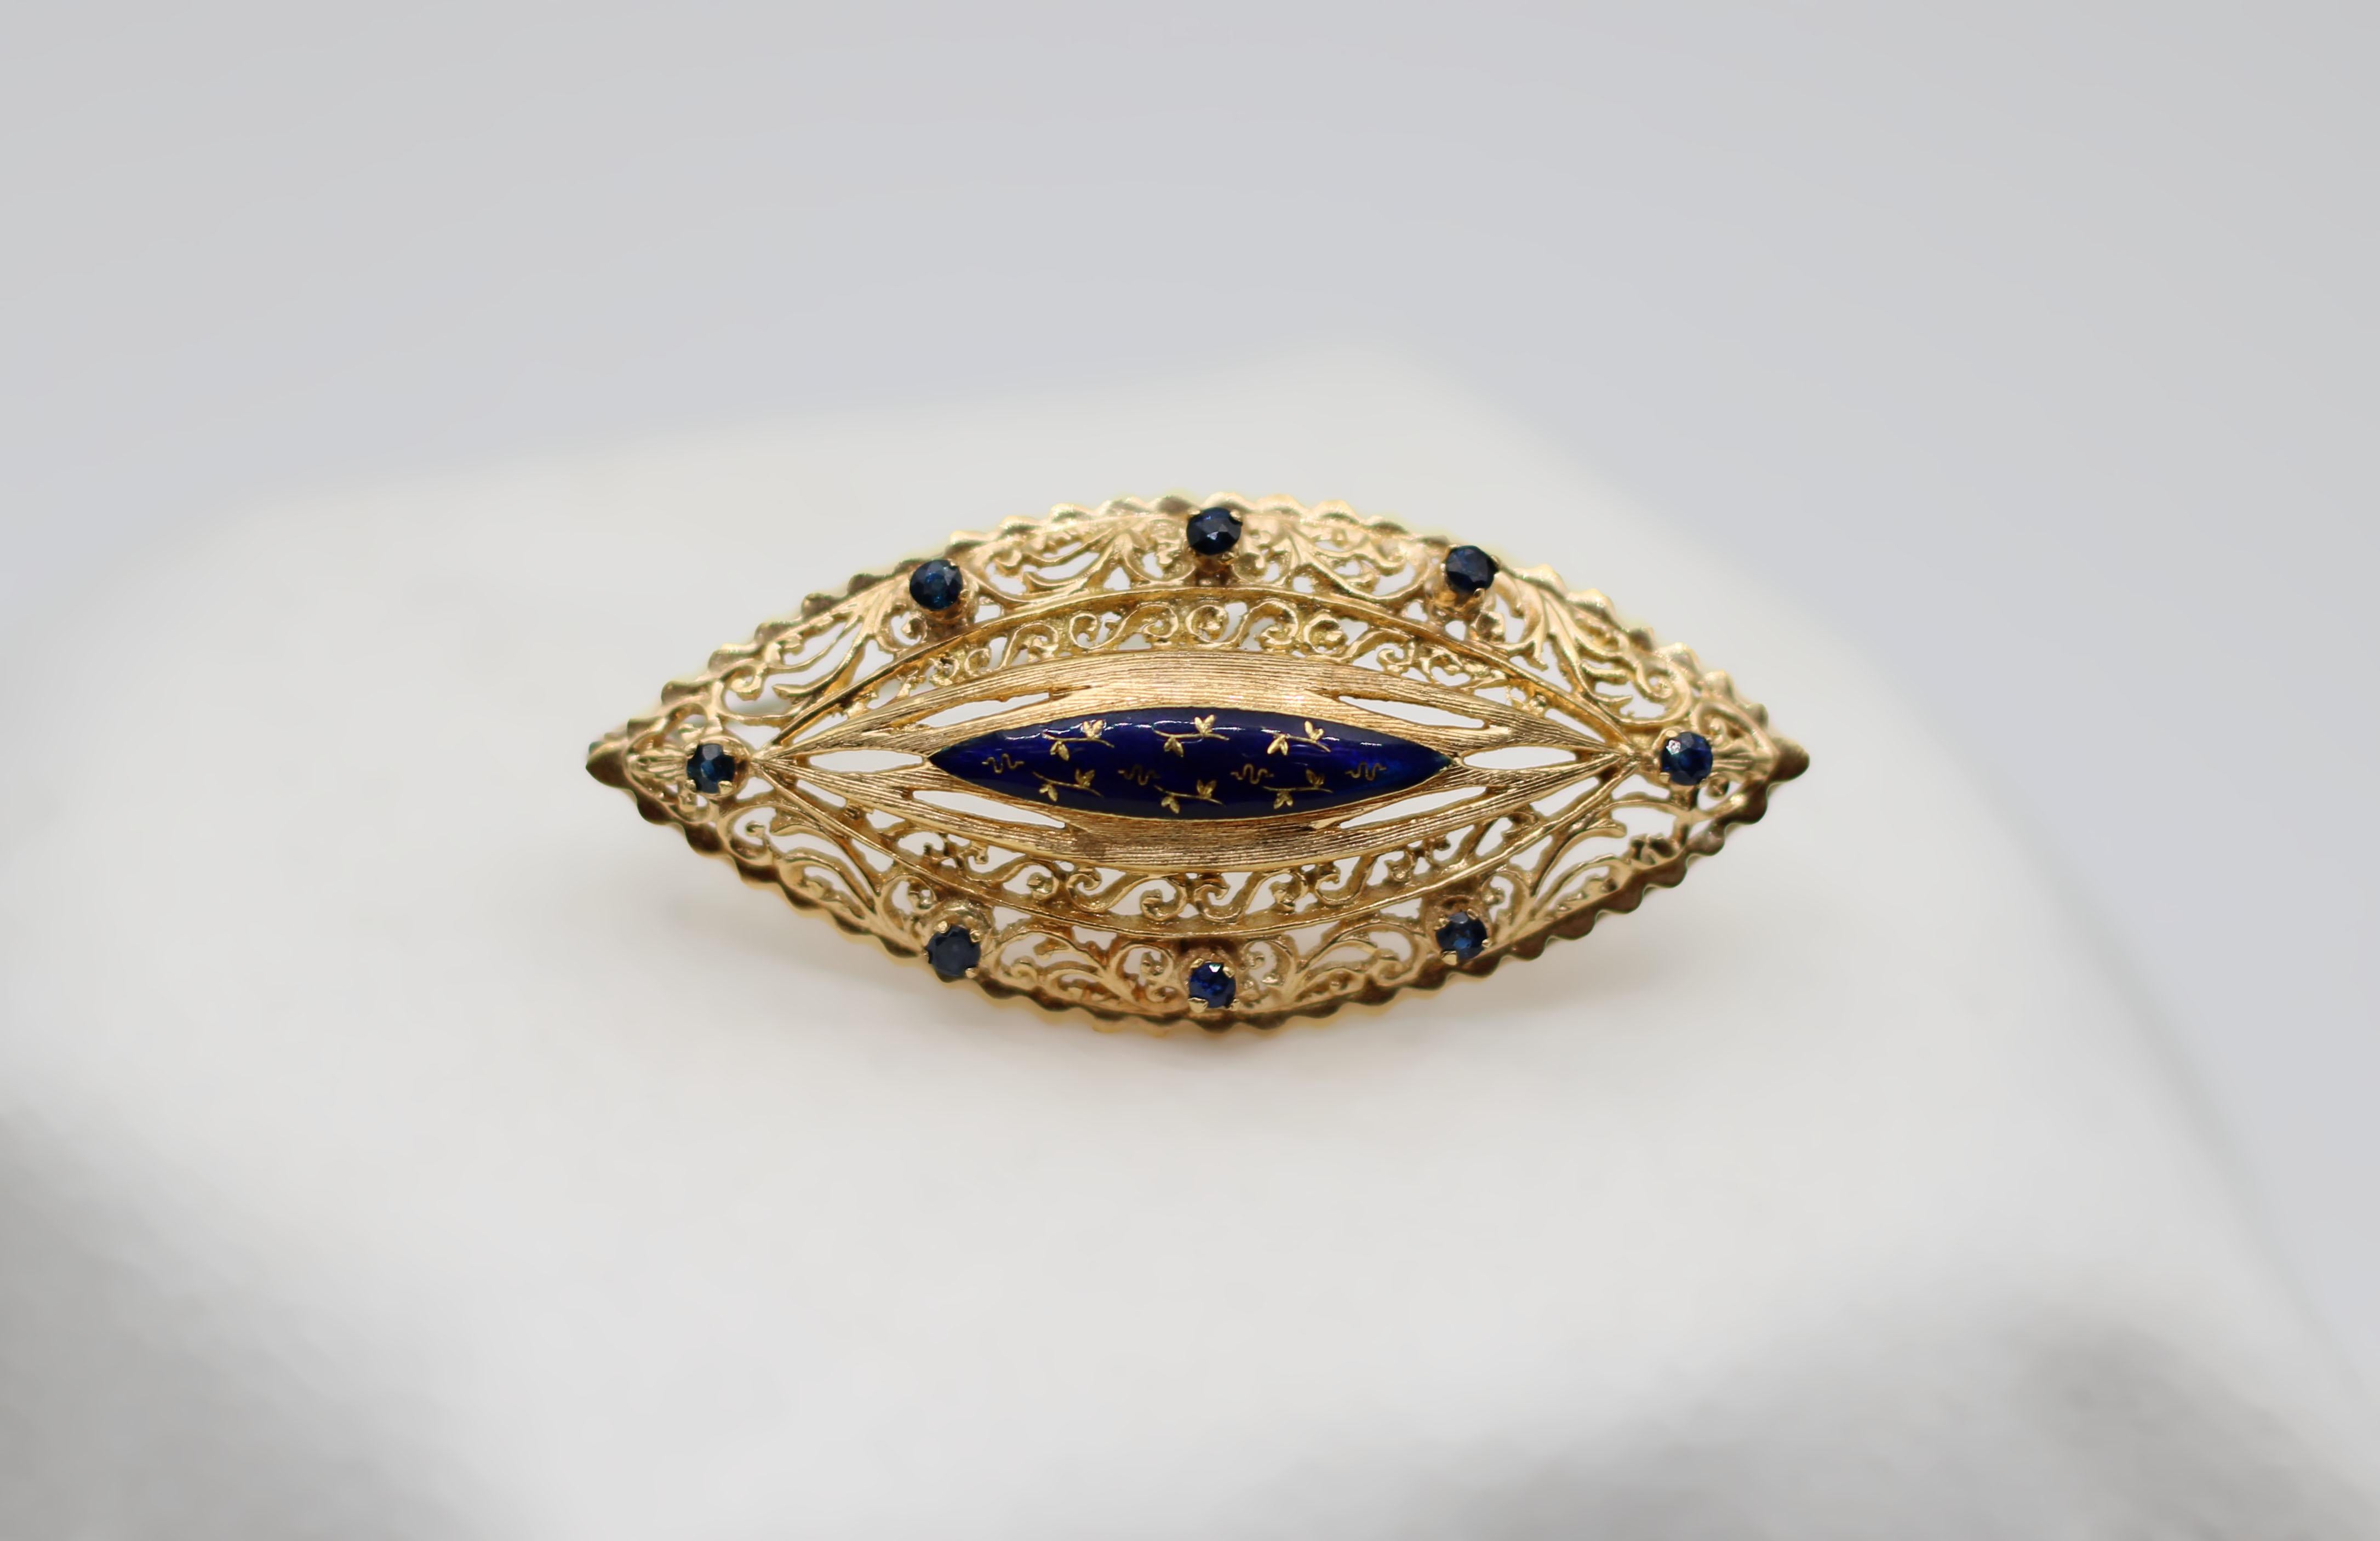 Simplistic in design and curving with Arabesque swirls, this 1960s brooch features a centerpiece of blue enamel surrounded by round-cut sapphires. 

Metal: 14KT Yellow Gold
Total Weight: 9.18g 
Measurements: 50mm x 22mm
Composition: 0.70 Carats of